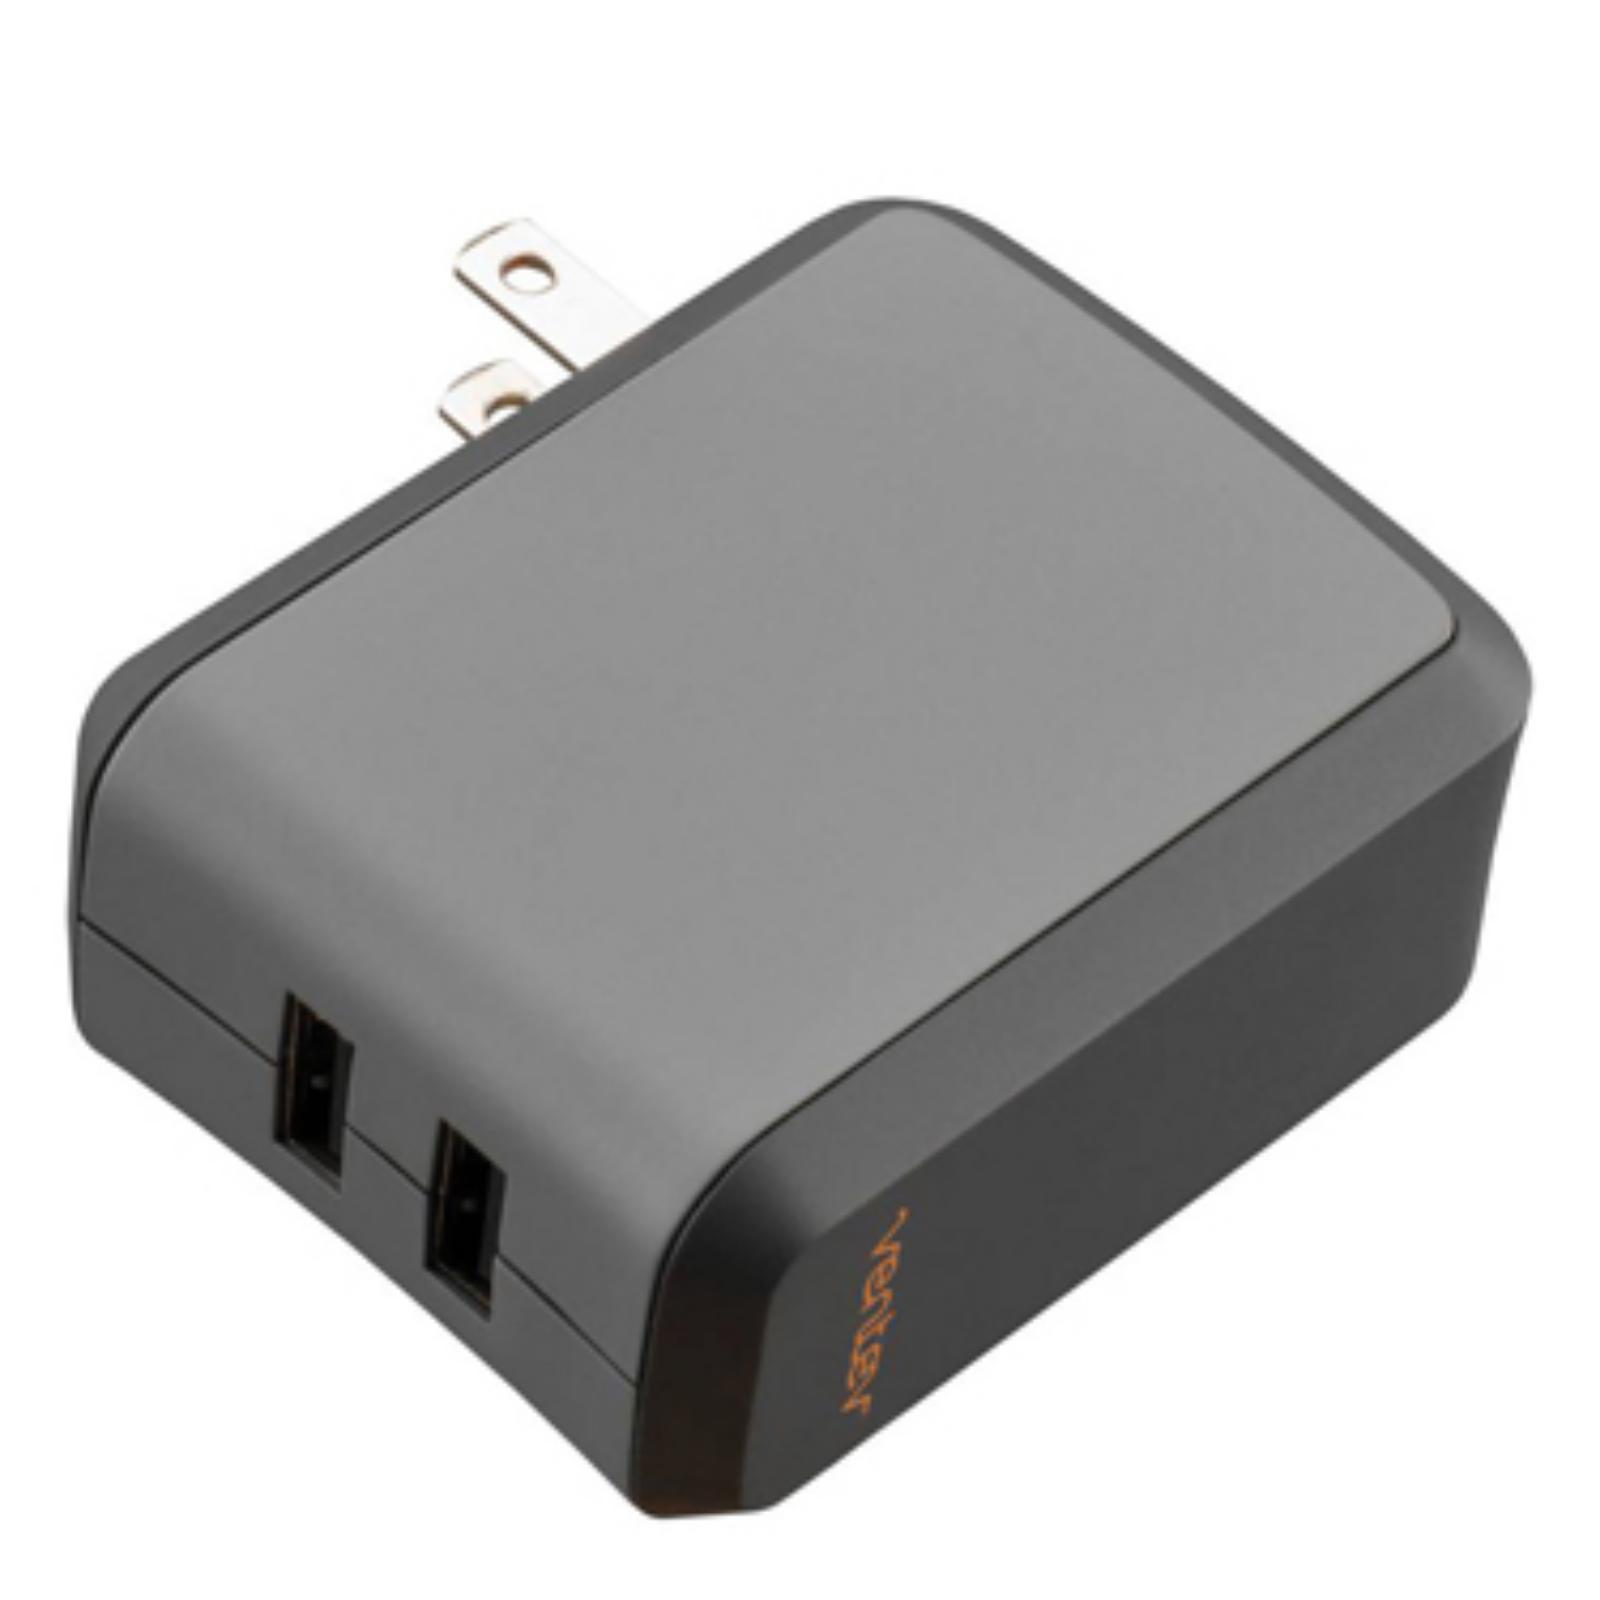 VENTEV WALL CHARGER 2PORT